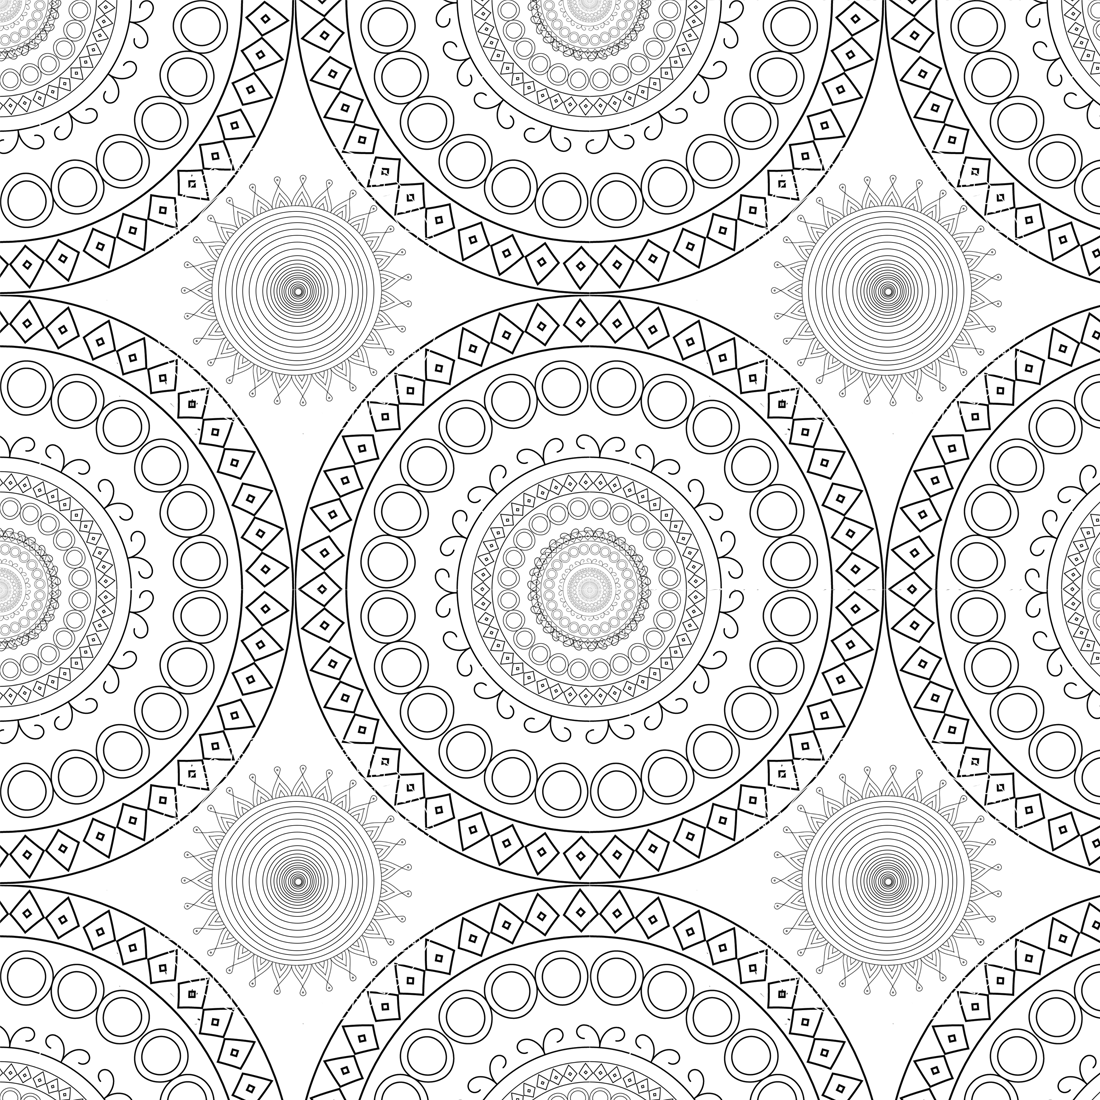 Mandala design black and white texture preview image.